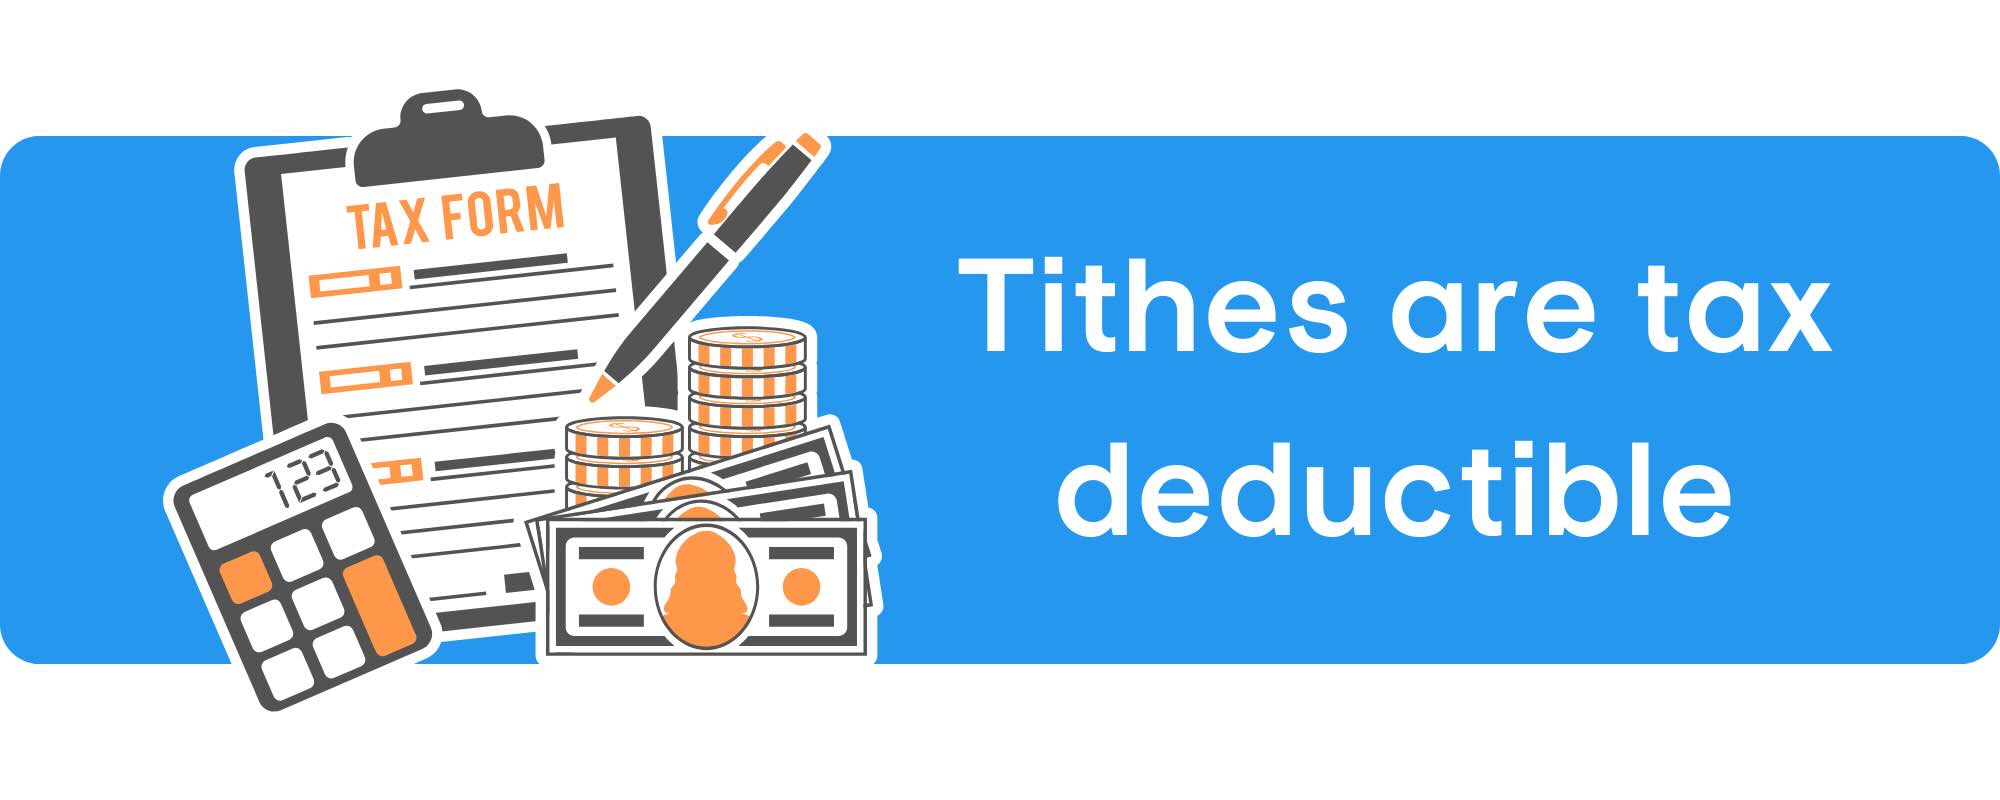 Is tithing tax deductible? Yes, tithes can be used as a tax deduction